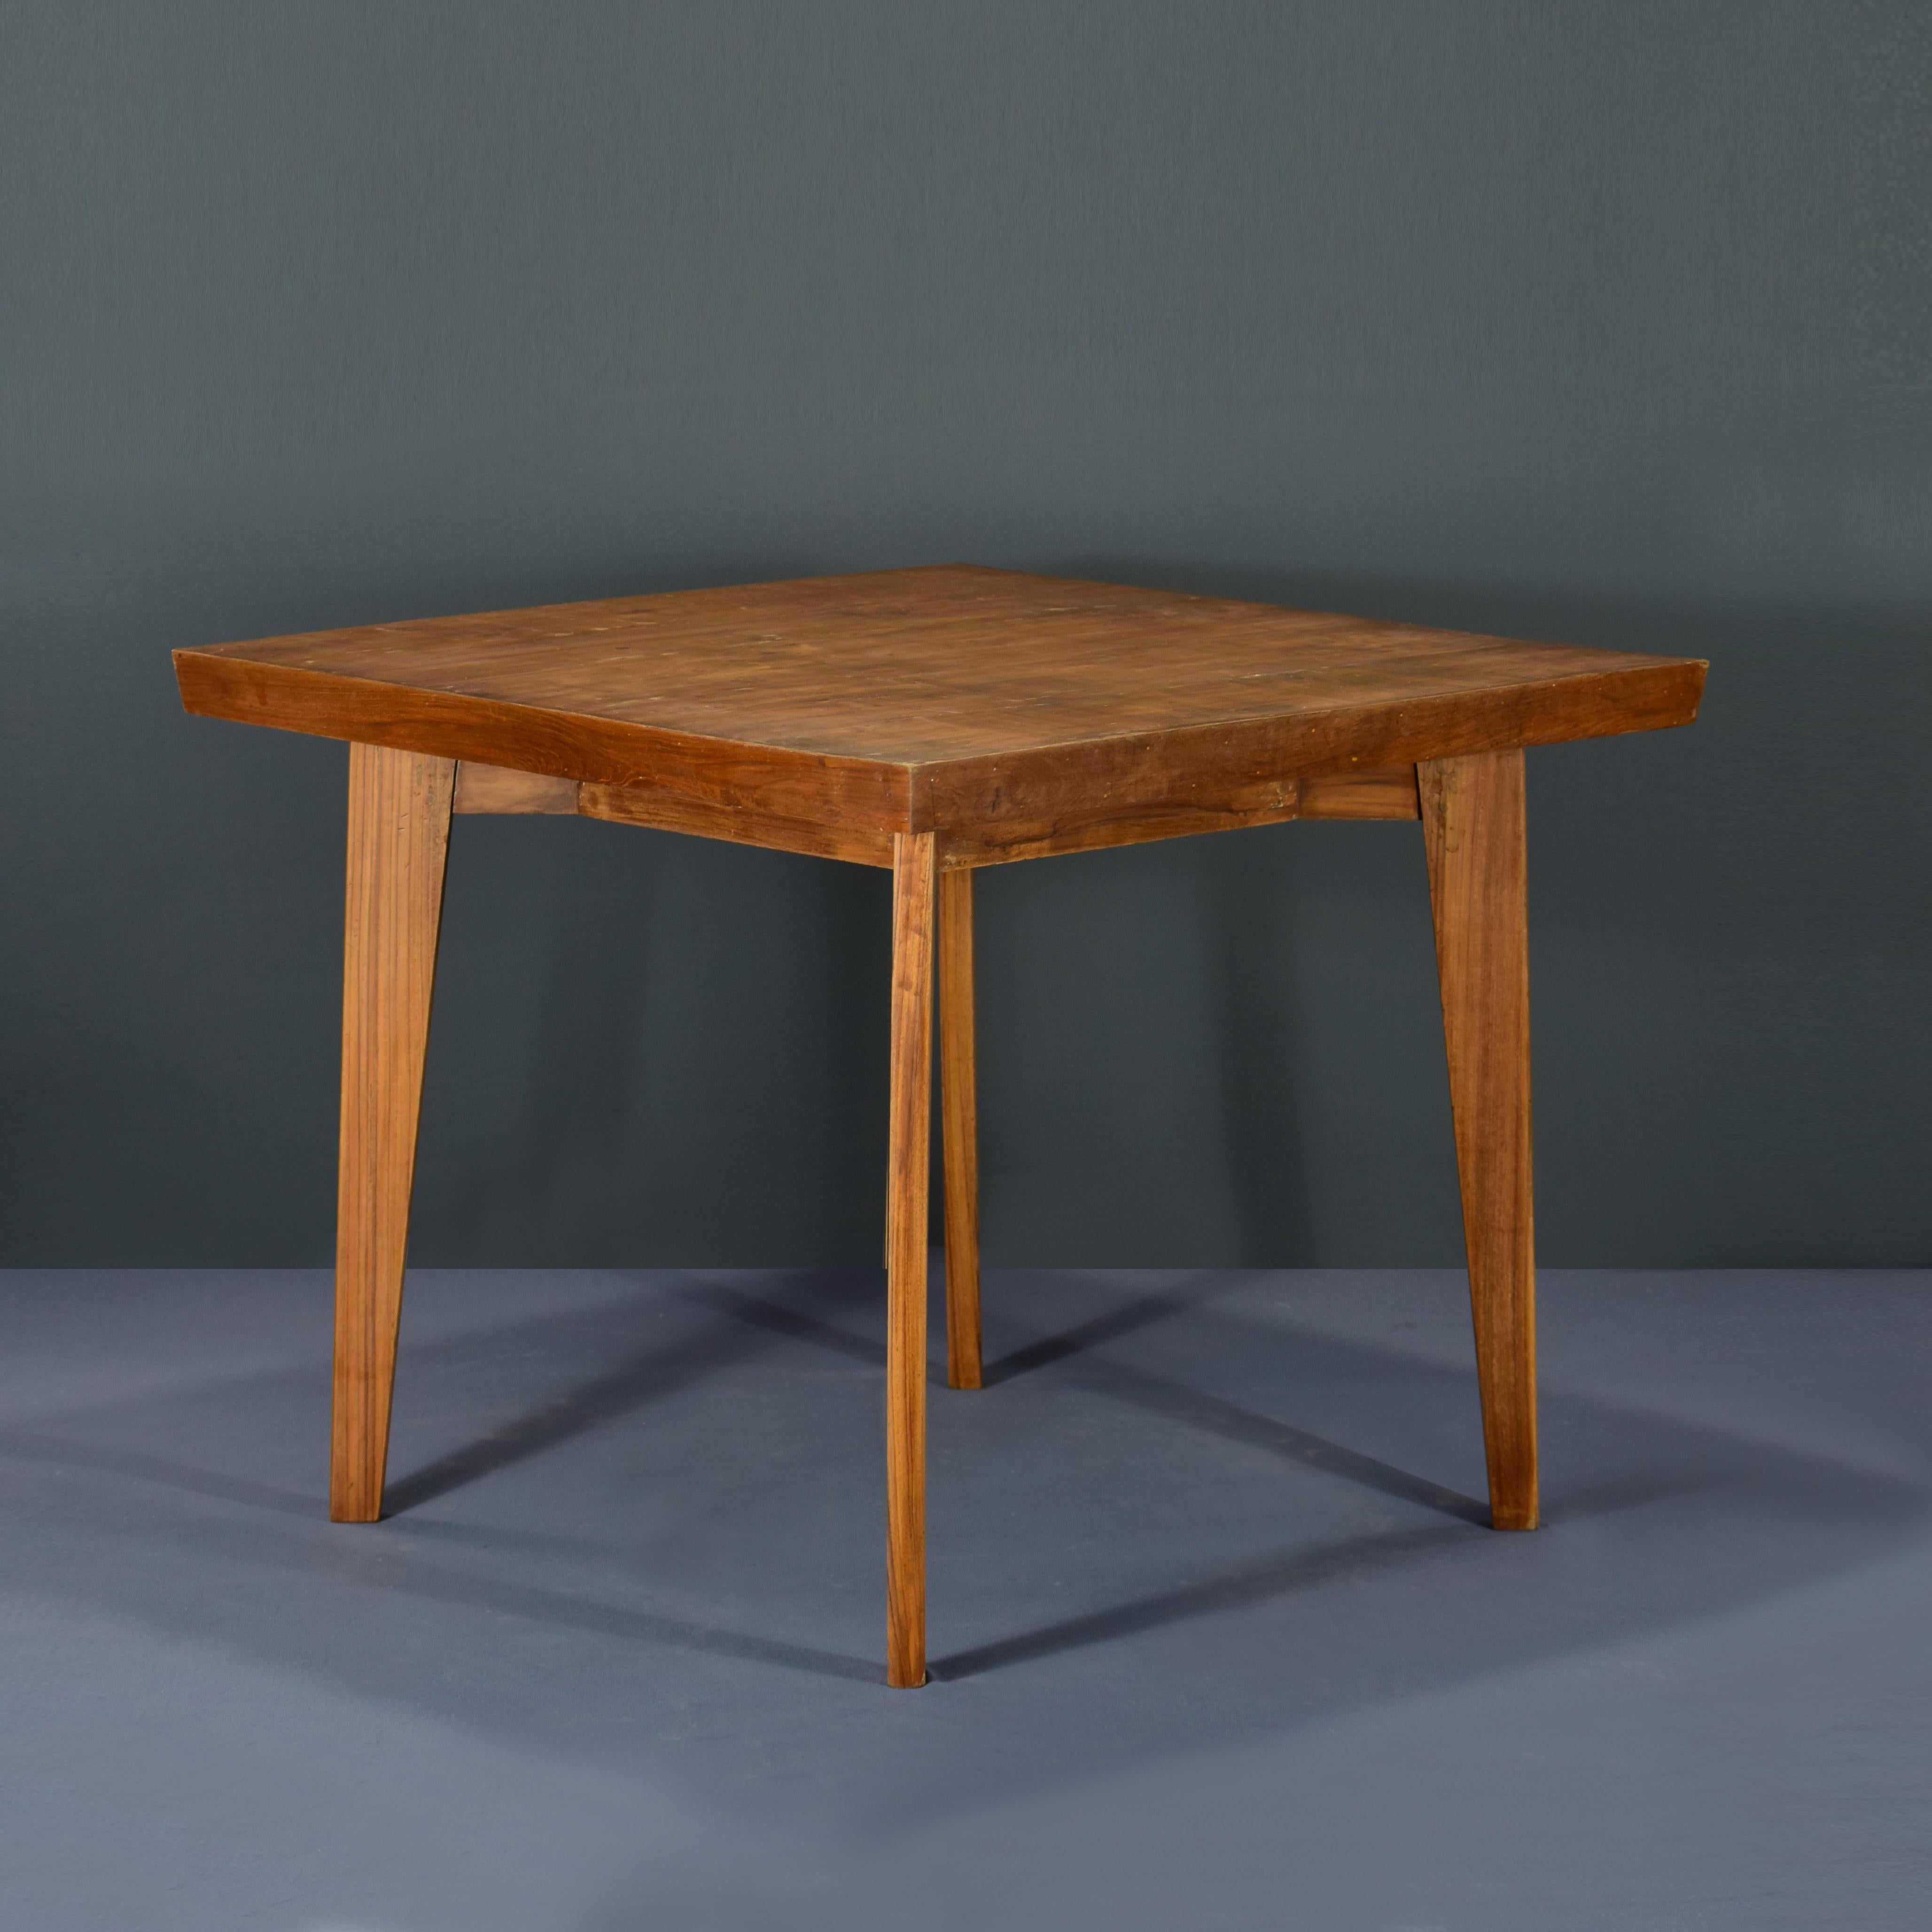 Mid-20th Century Pierre Jeanneret PJ-TA-05-A Dining Table / Authentic Mid-Century Modern For Sale